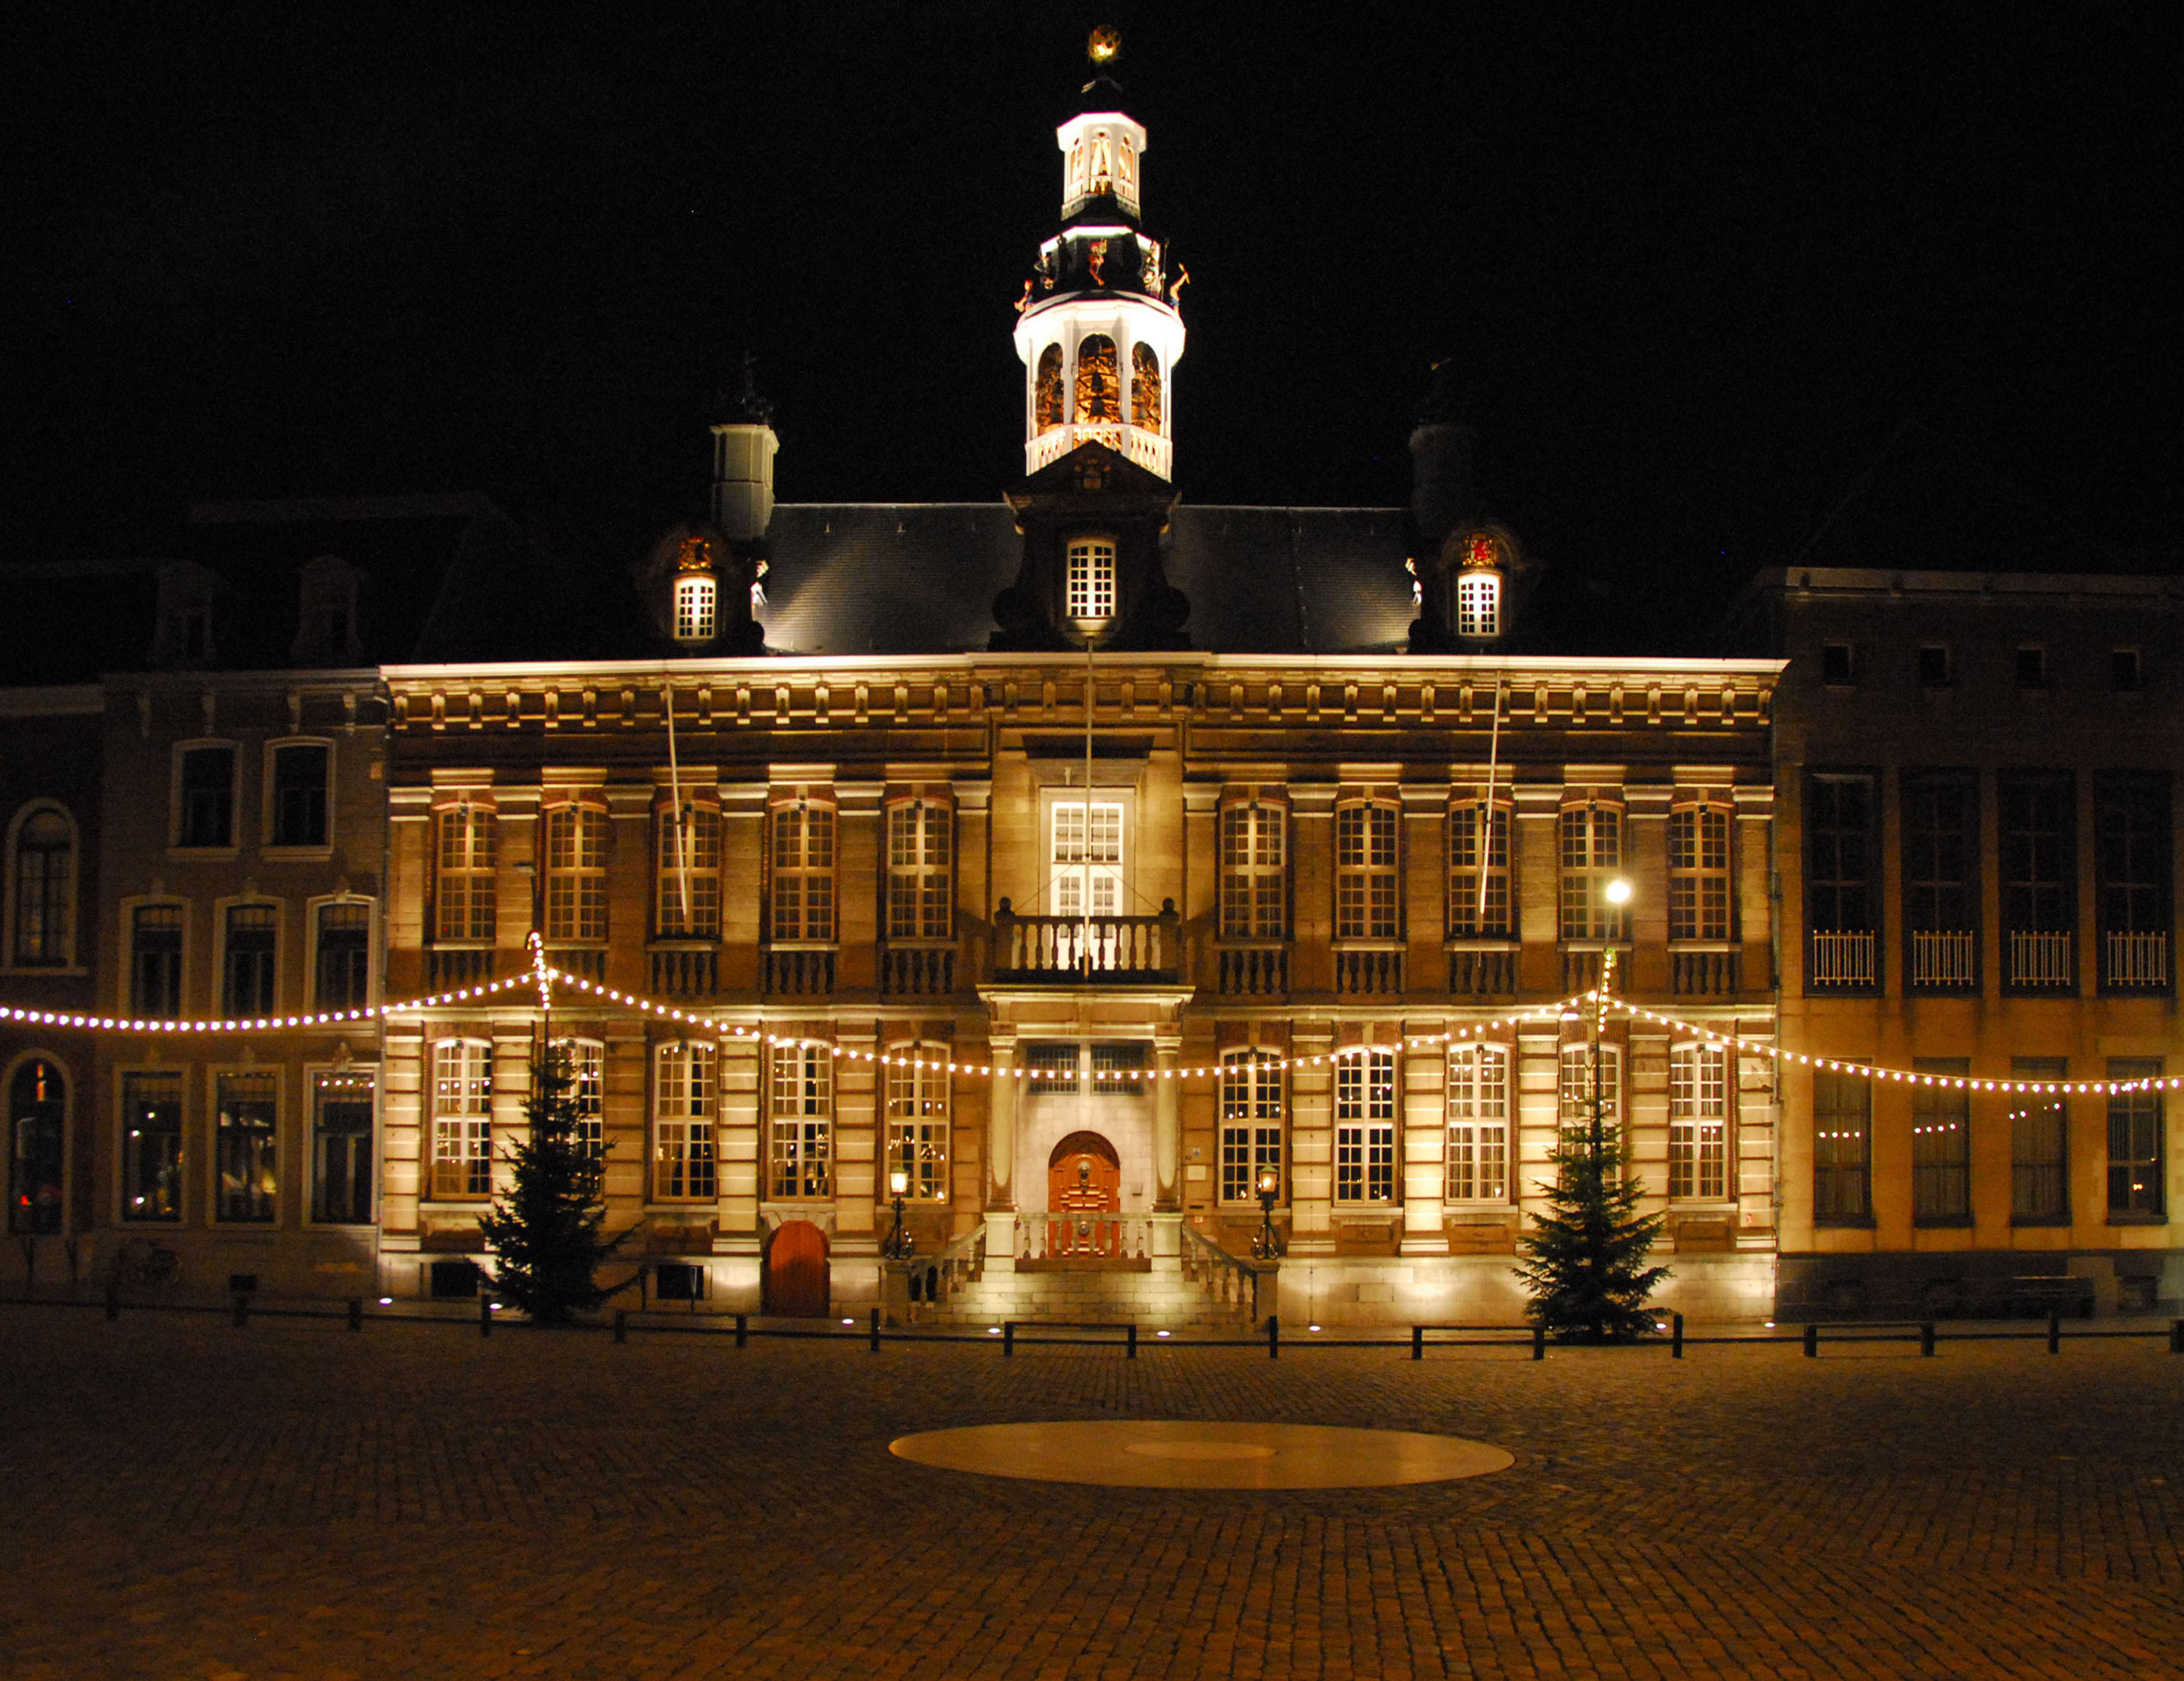 Stadhuis (Town Hall) Roermond